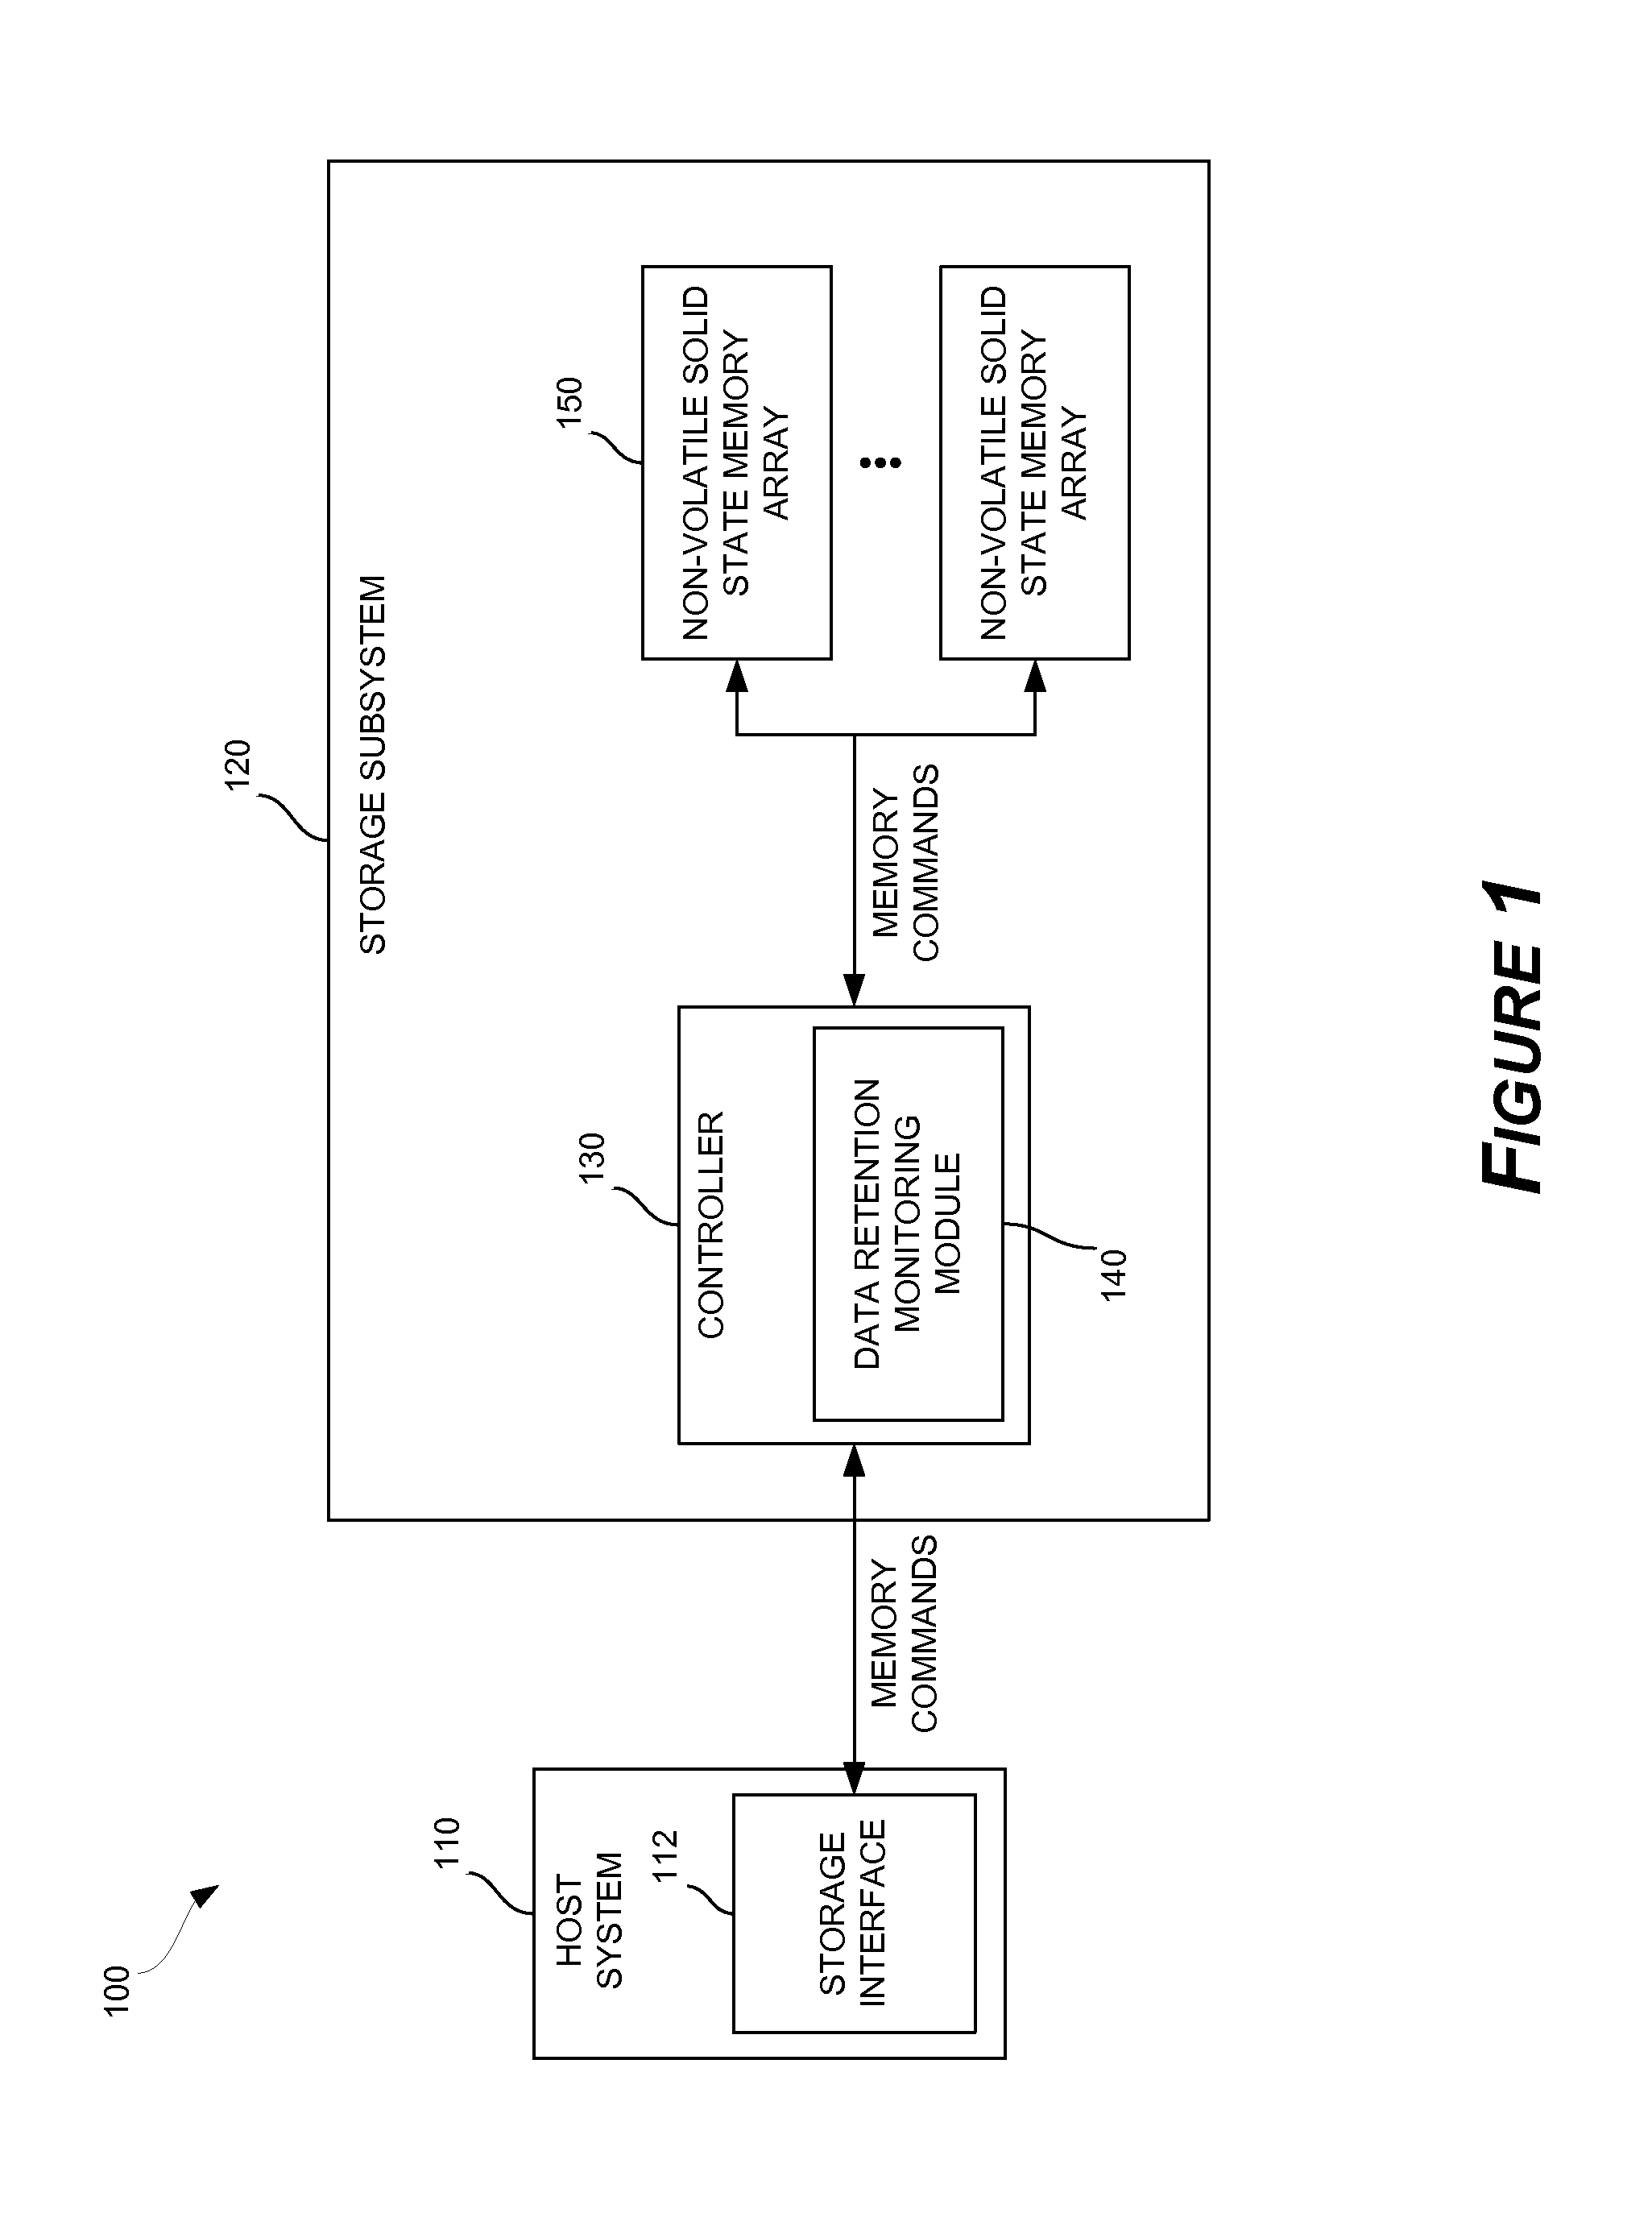 Solid-state drive retention monitor using reference blocks